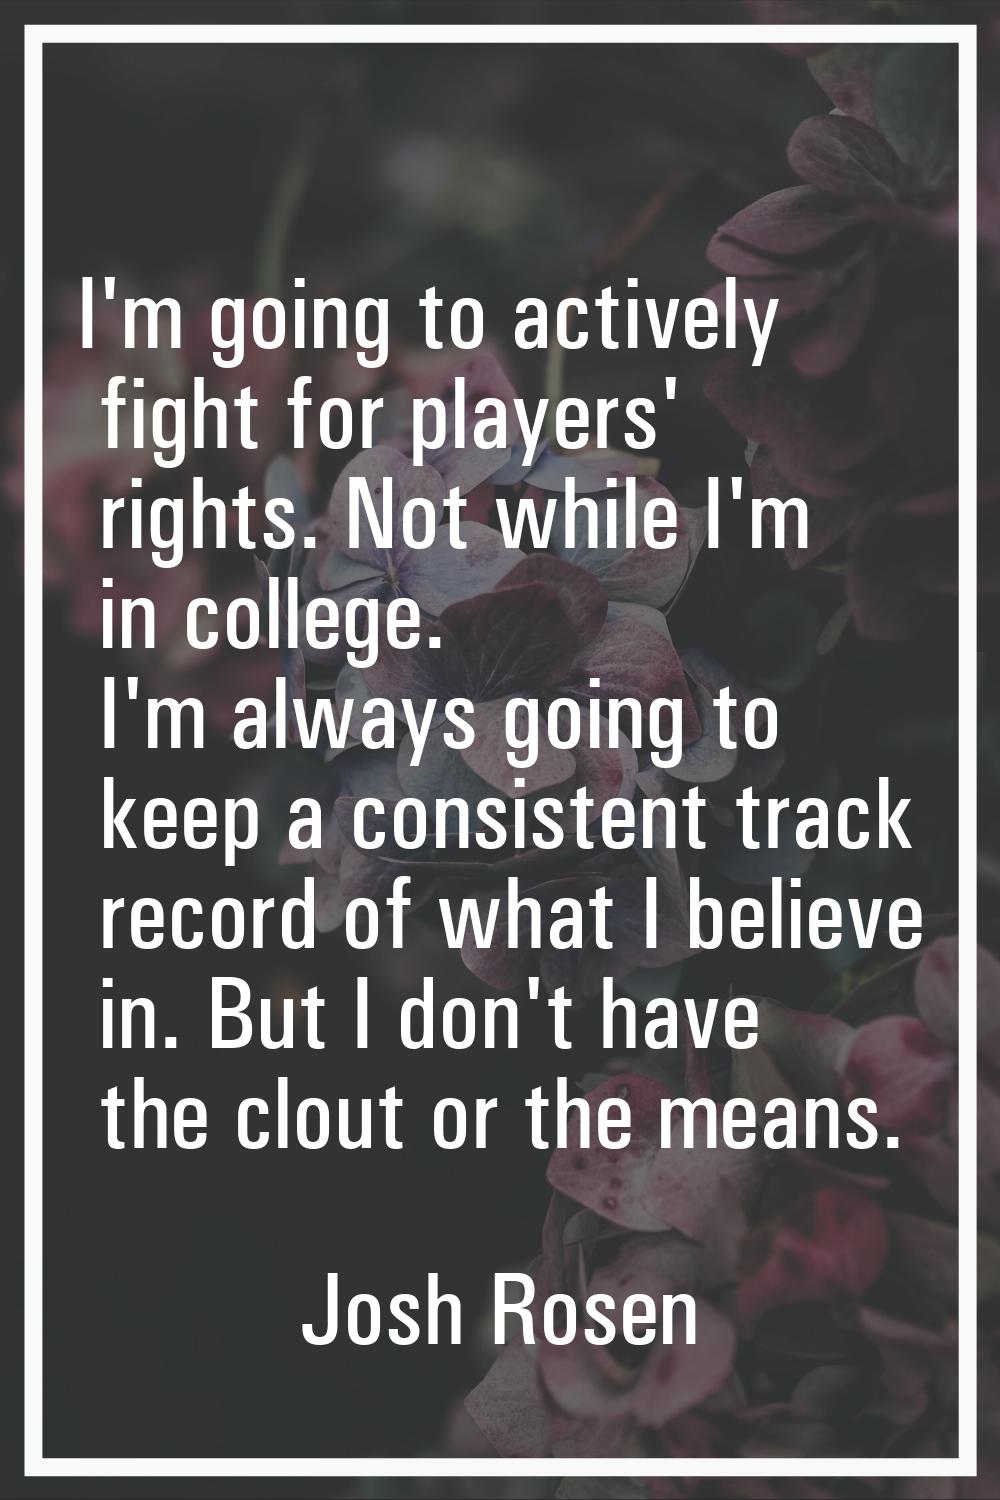 I'm going to actively fight for players' rights. Not while I'm in college. I'm always going to keep